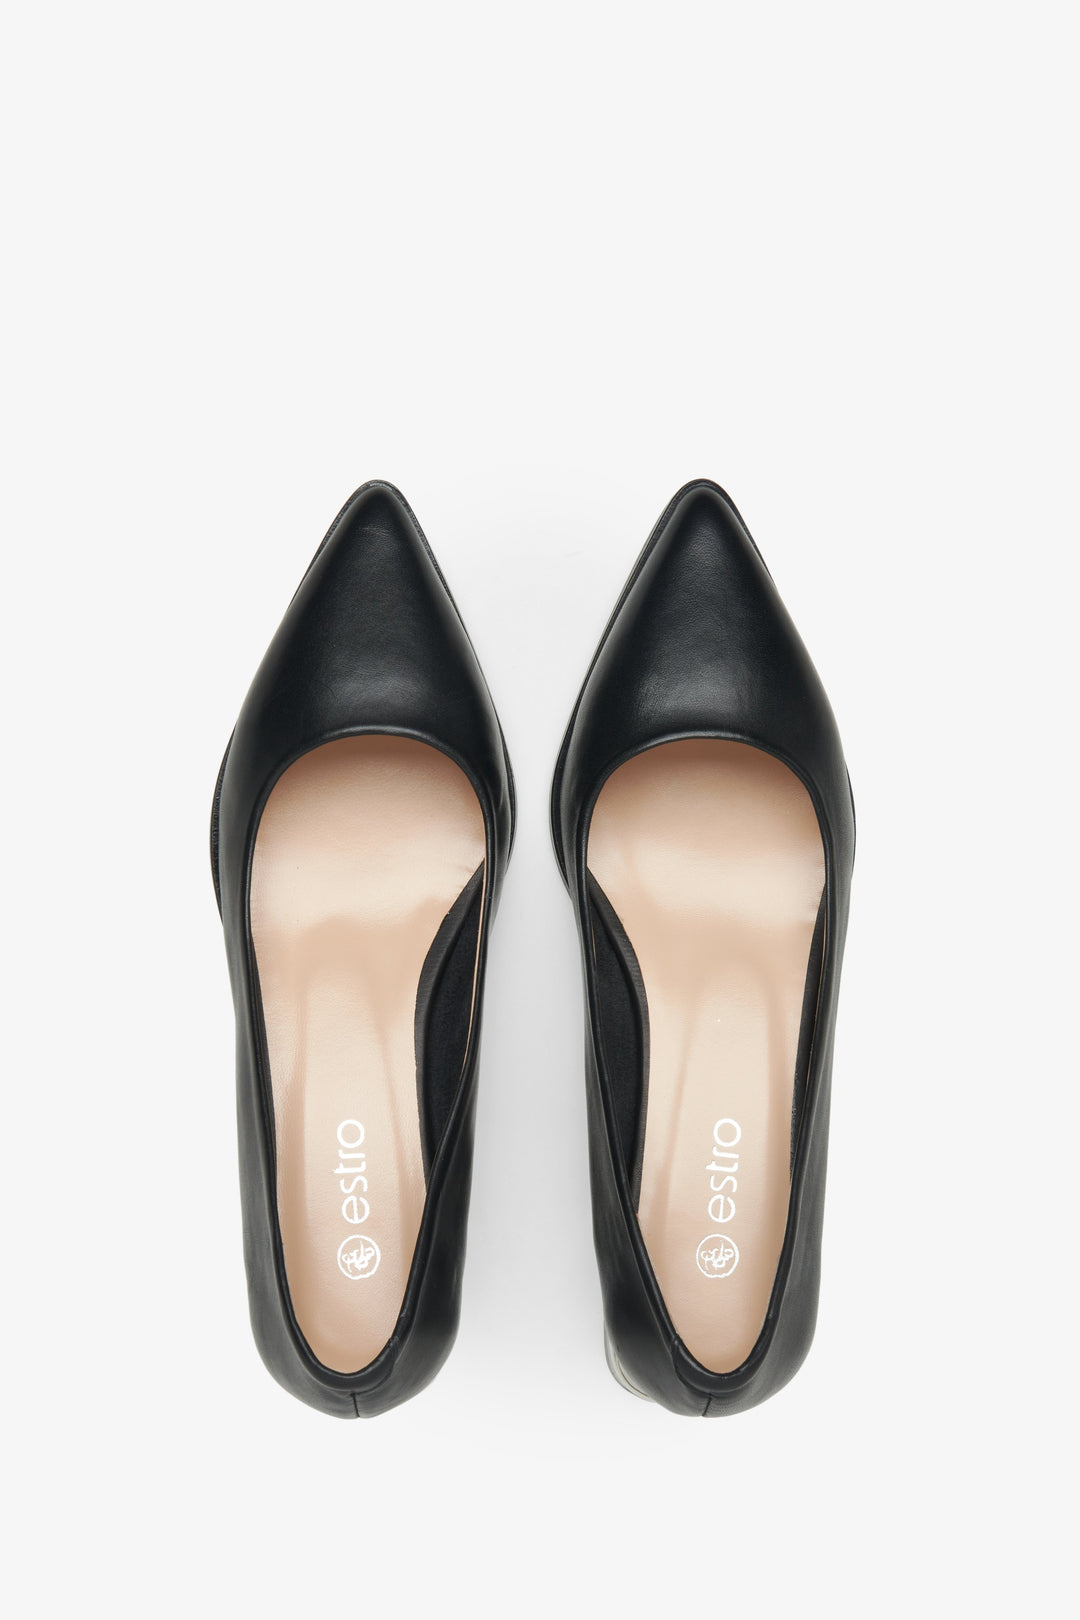 Women's leather black pumps by Estro with a pointed toe - top view presentation of the footwear.